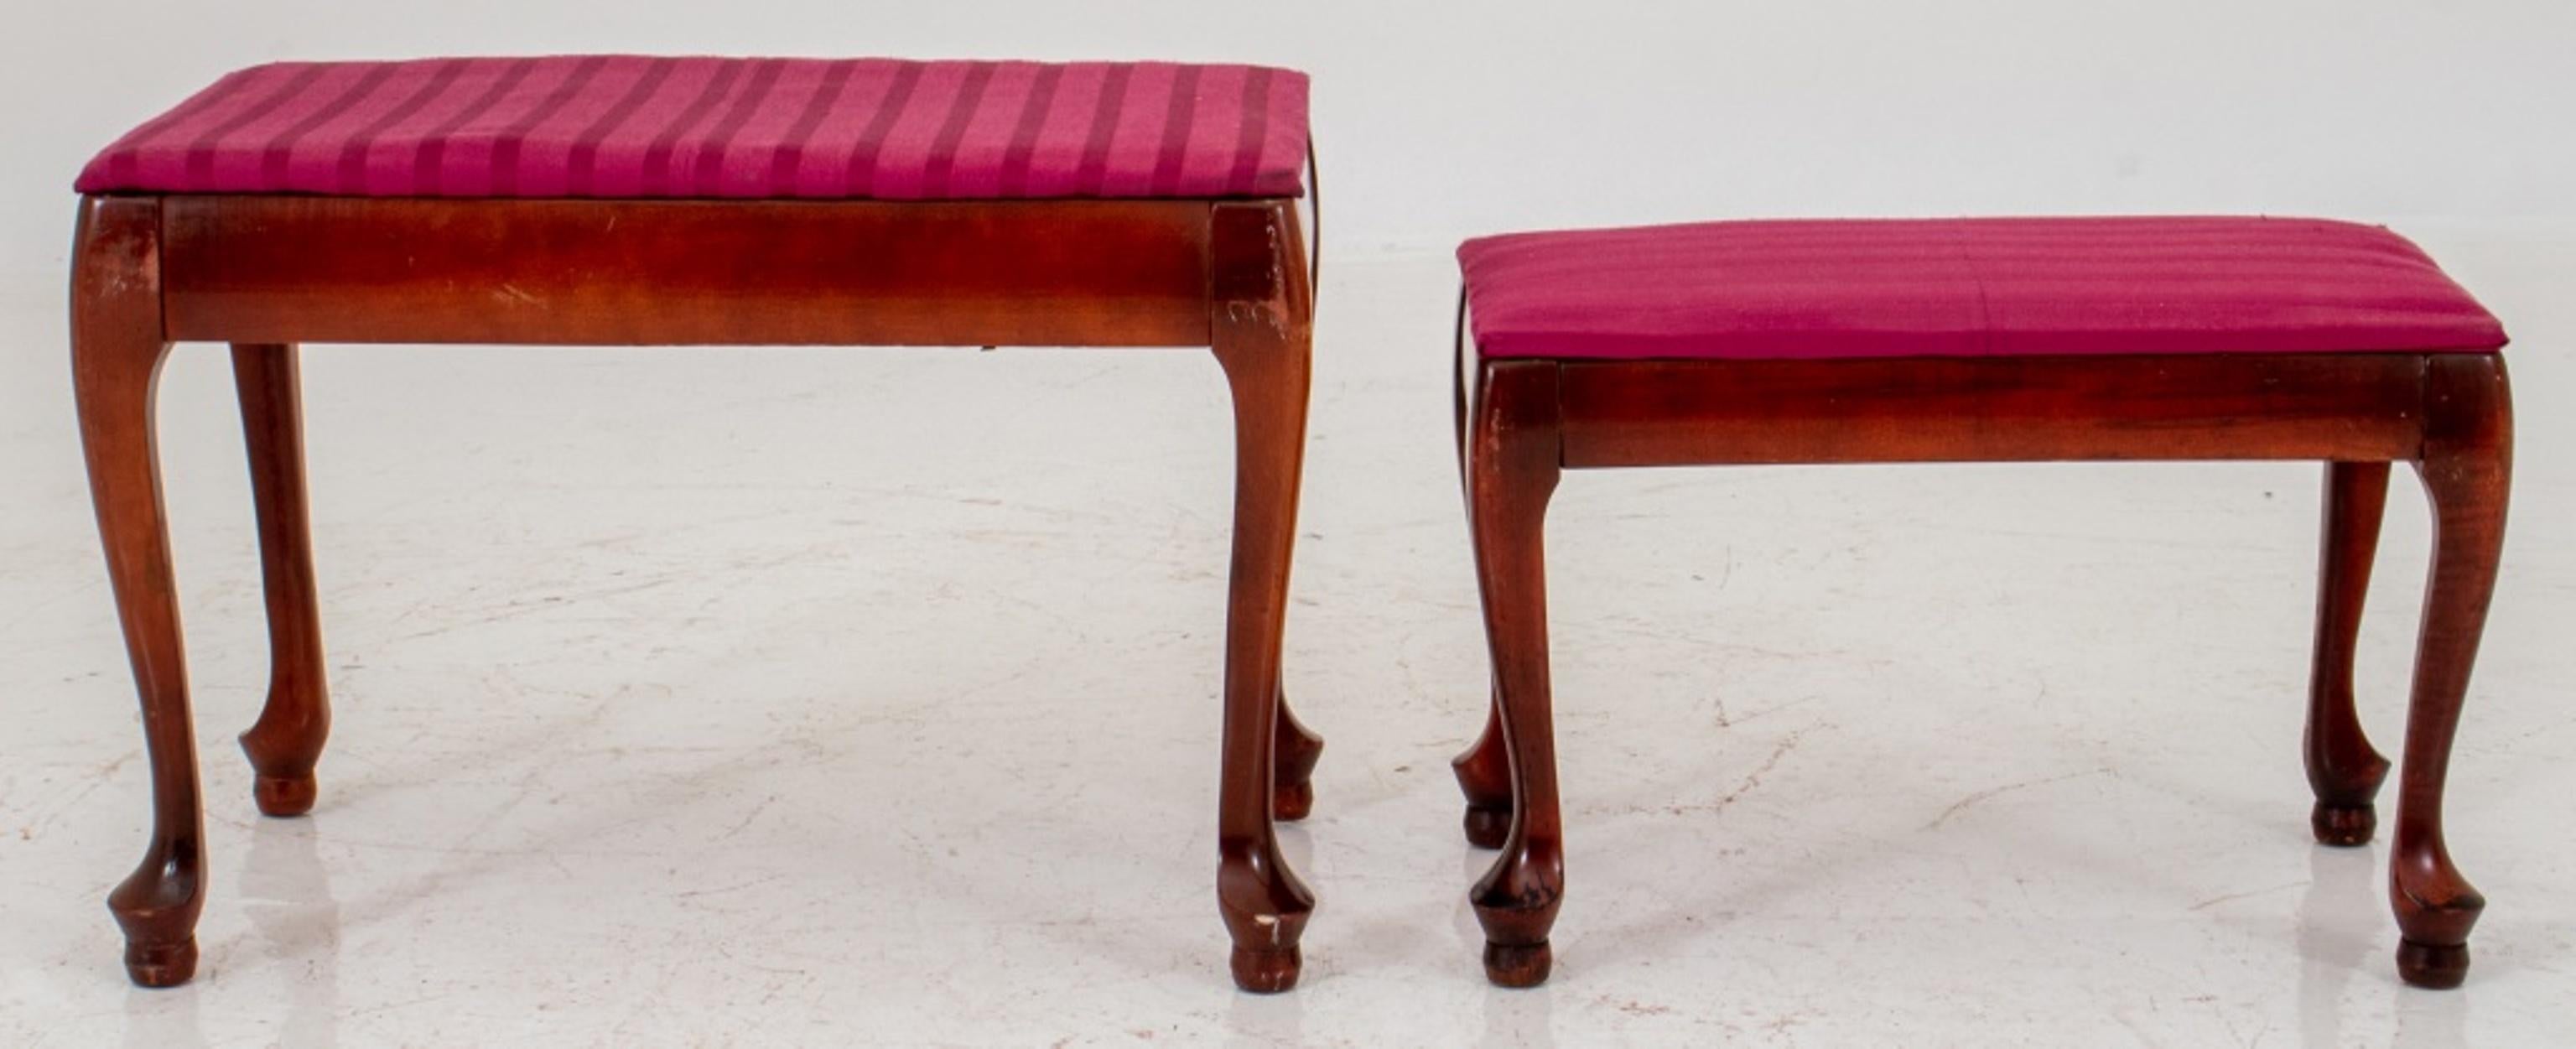 Two Queen Anne style hardwood stools or ottomans with magenta upholstery, one smaller. Measures: Larger: 17